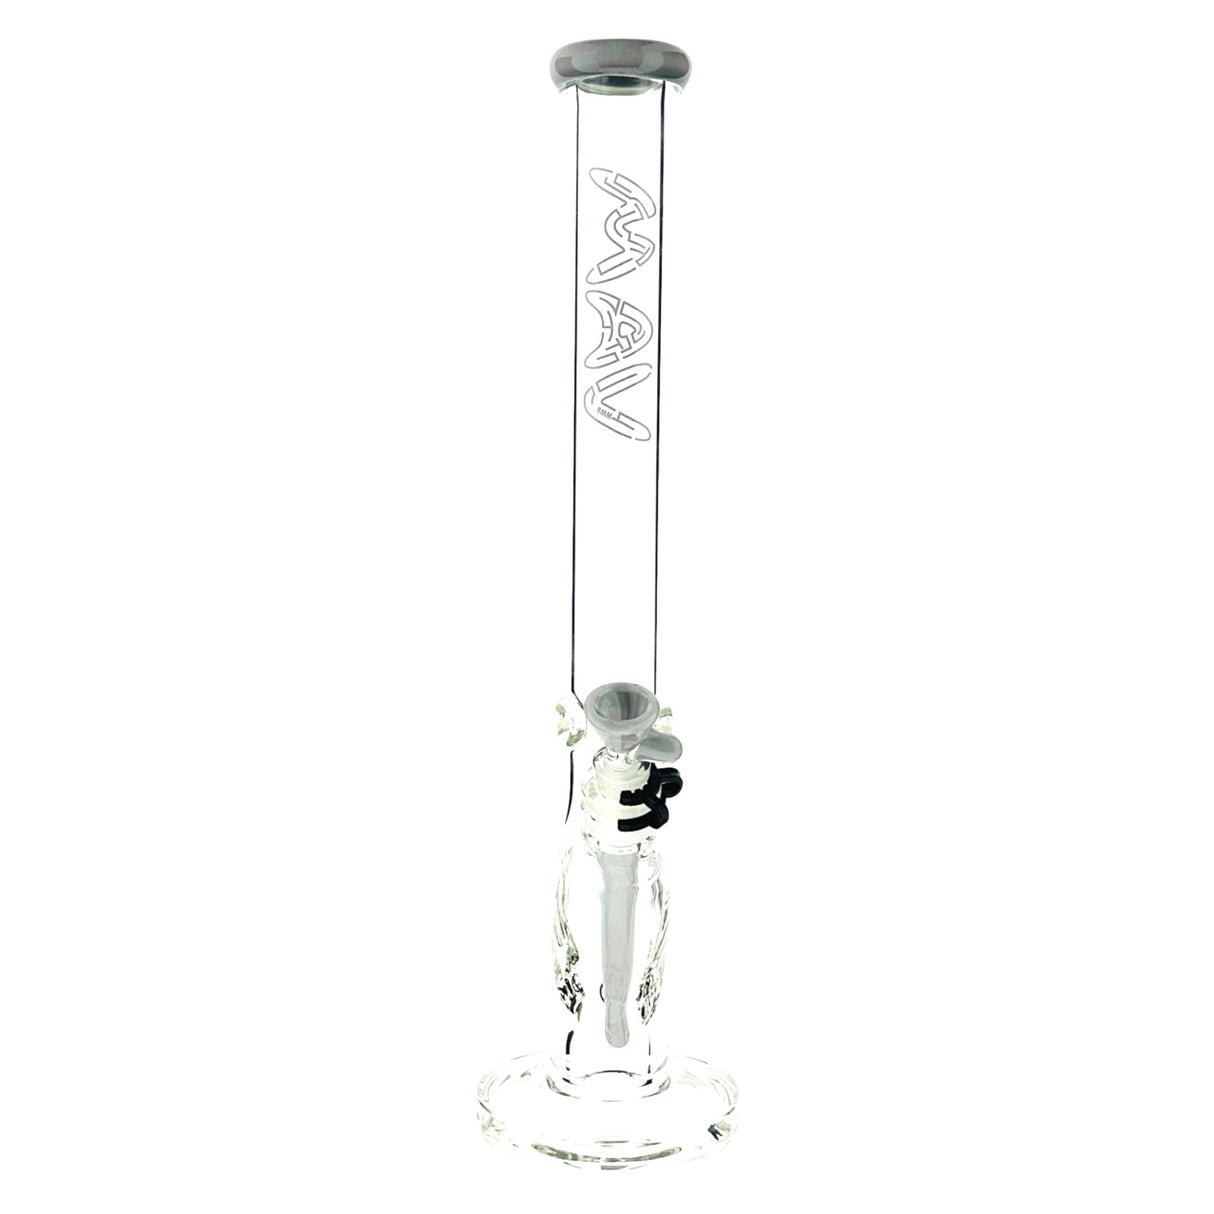 18" MAV Maze Accented Straight Bong, 9mm Thick Glass, Front View on White Background